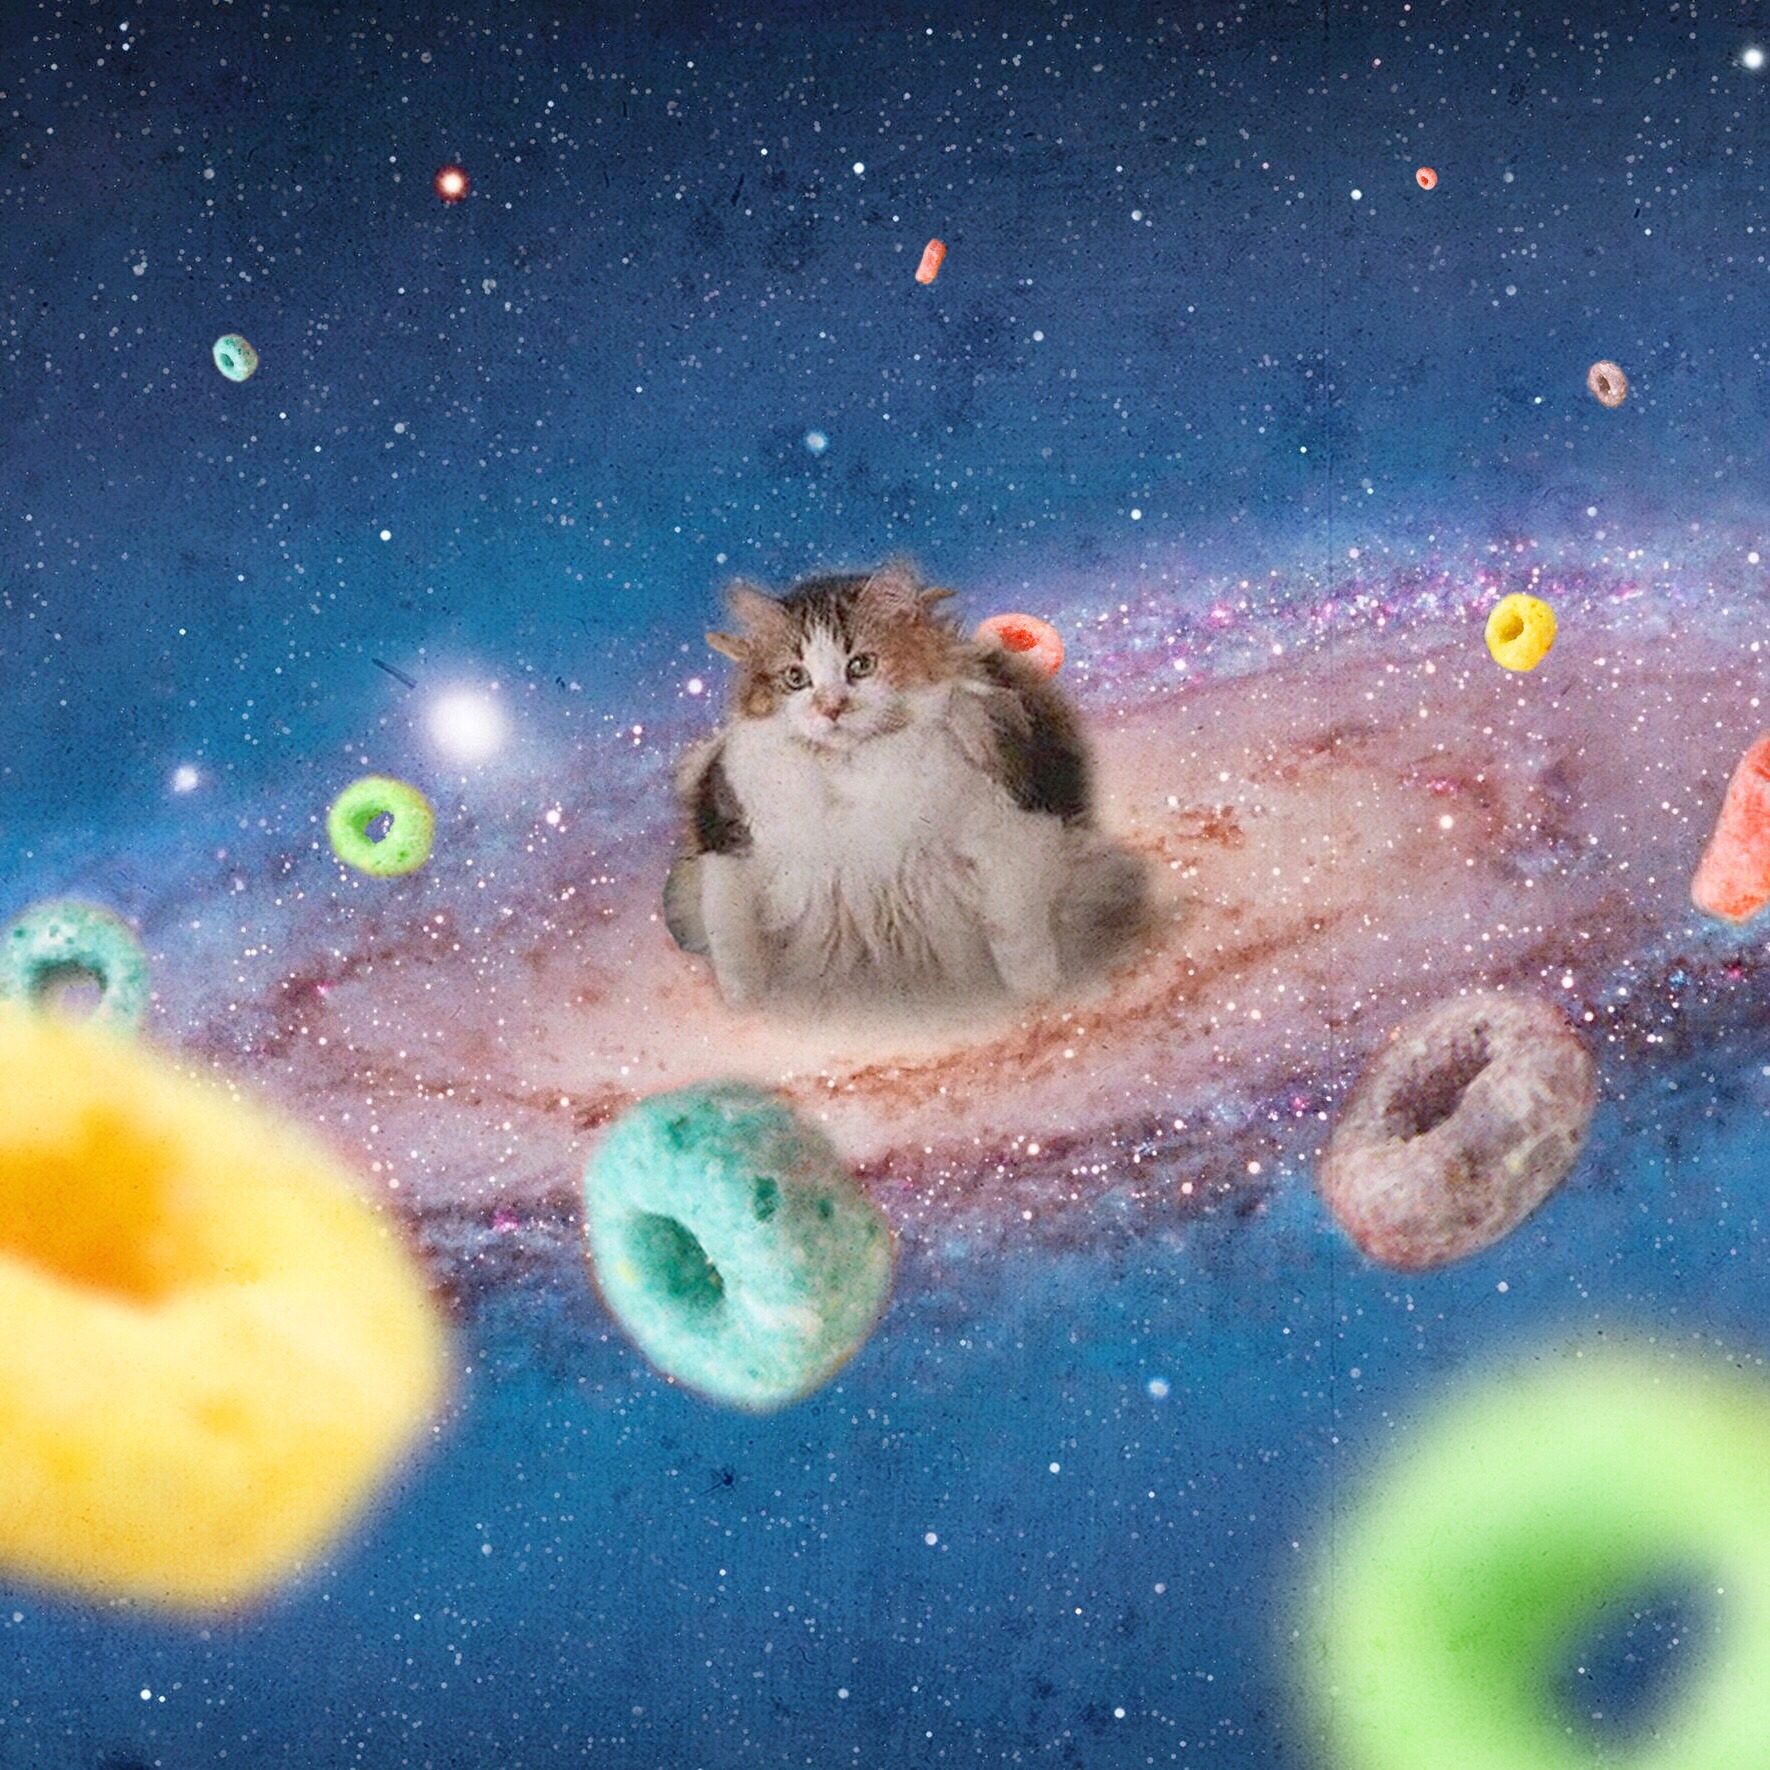 loops cat - loops cat in outer space